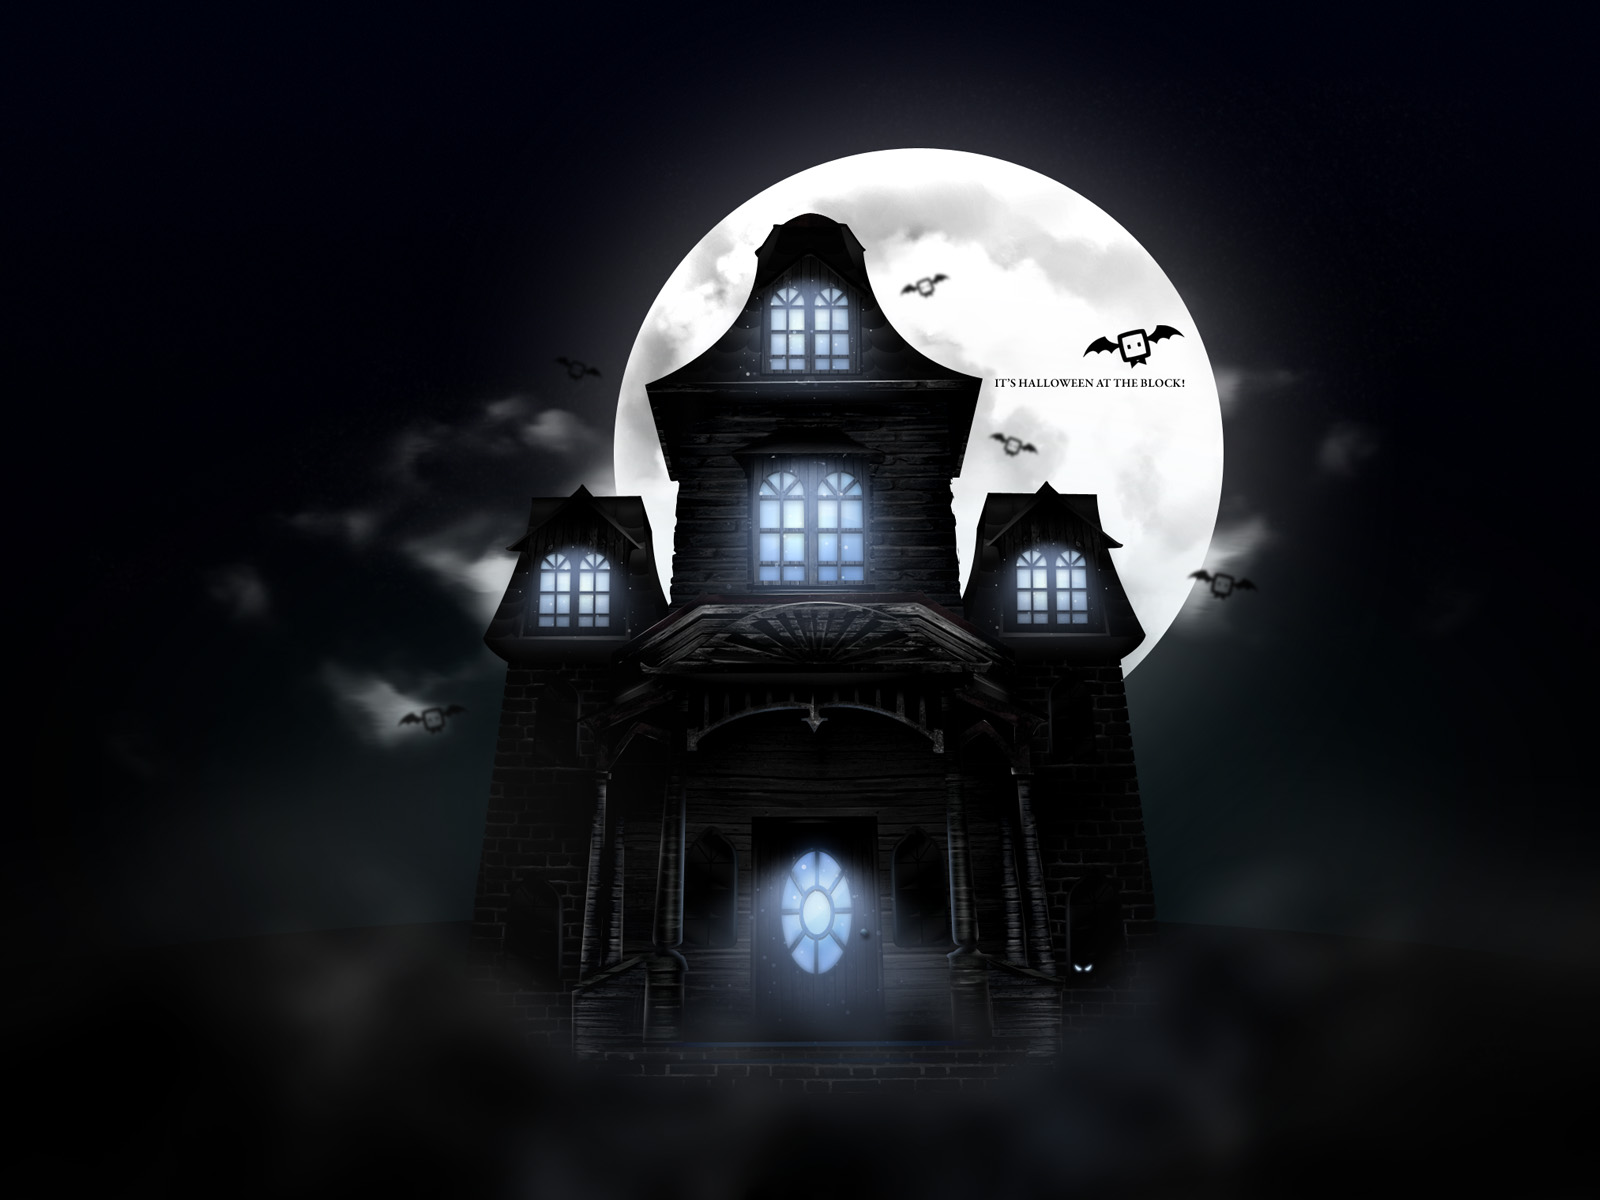  Wallpapers Pumpkins Witches Spider Web Bats Ghosts Collection 1600x1200